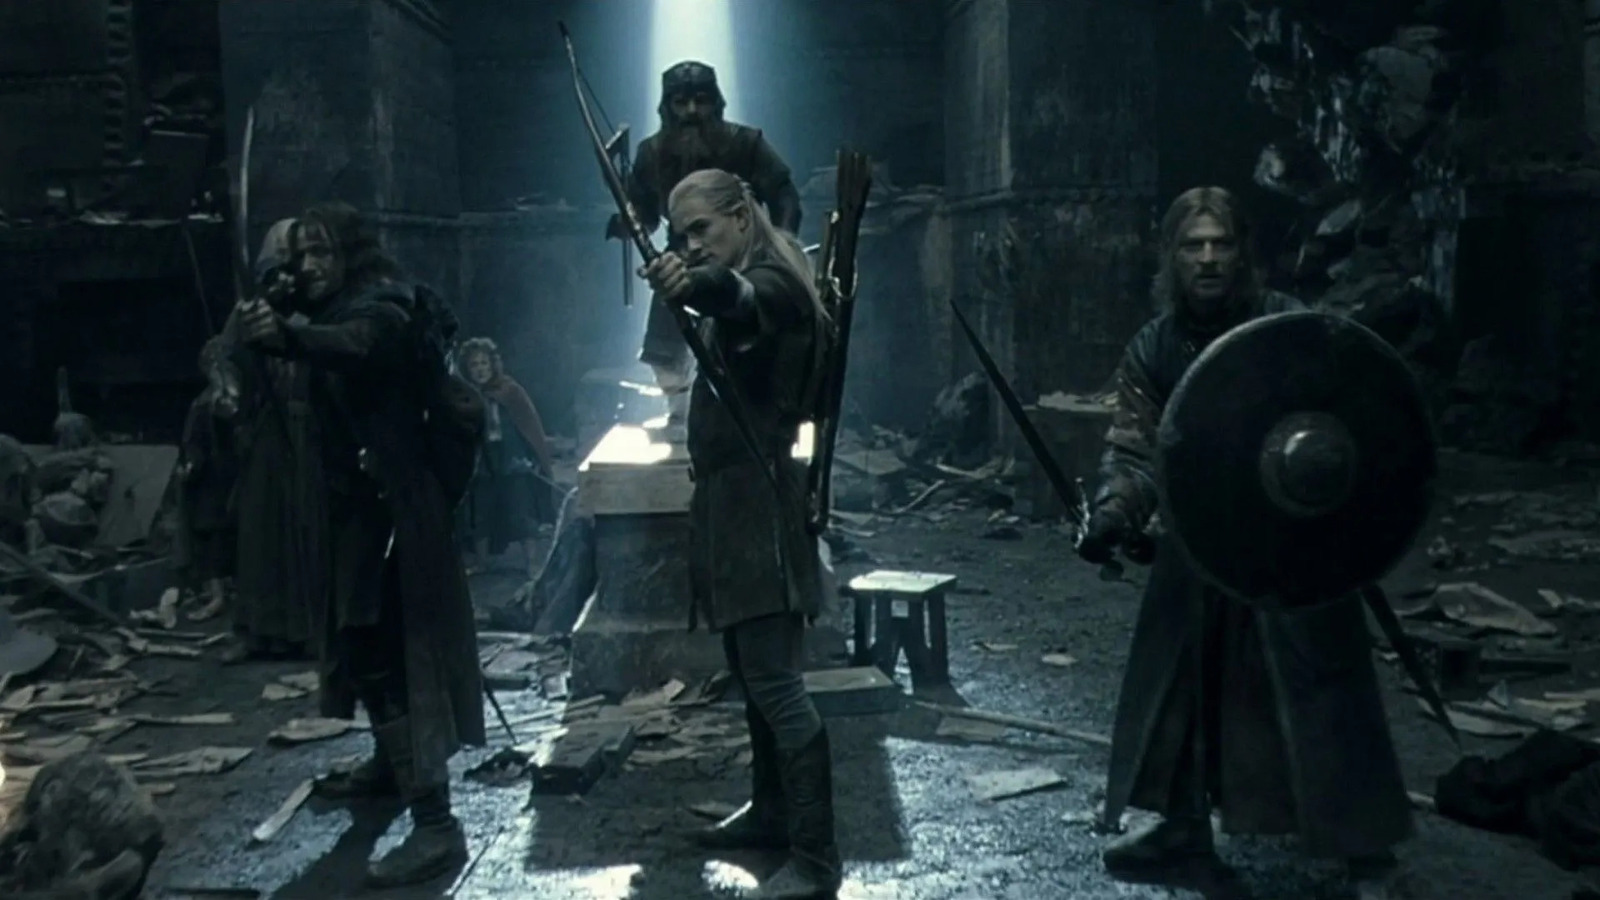 #The Lord Of The Rings’ Fight Choreography Had To Do More Than Just Look Cool